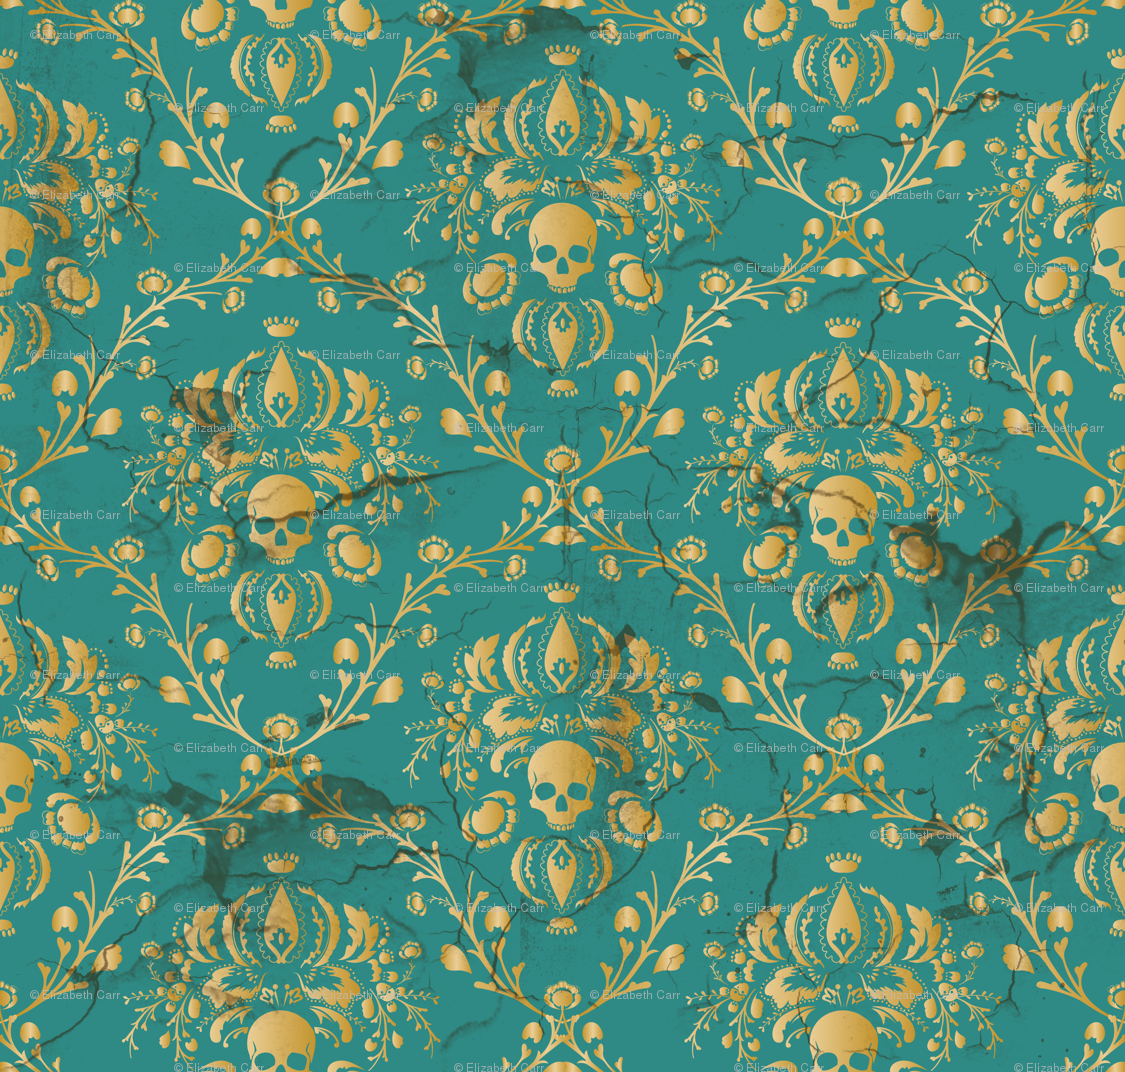 Elizabeths shop on Spoonflower fabric, wallpaper and gift wrap